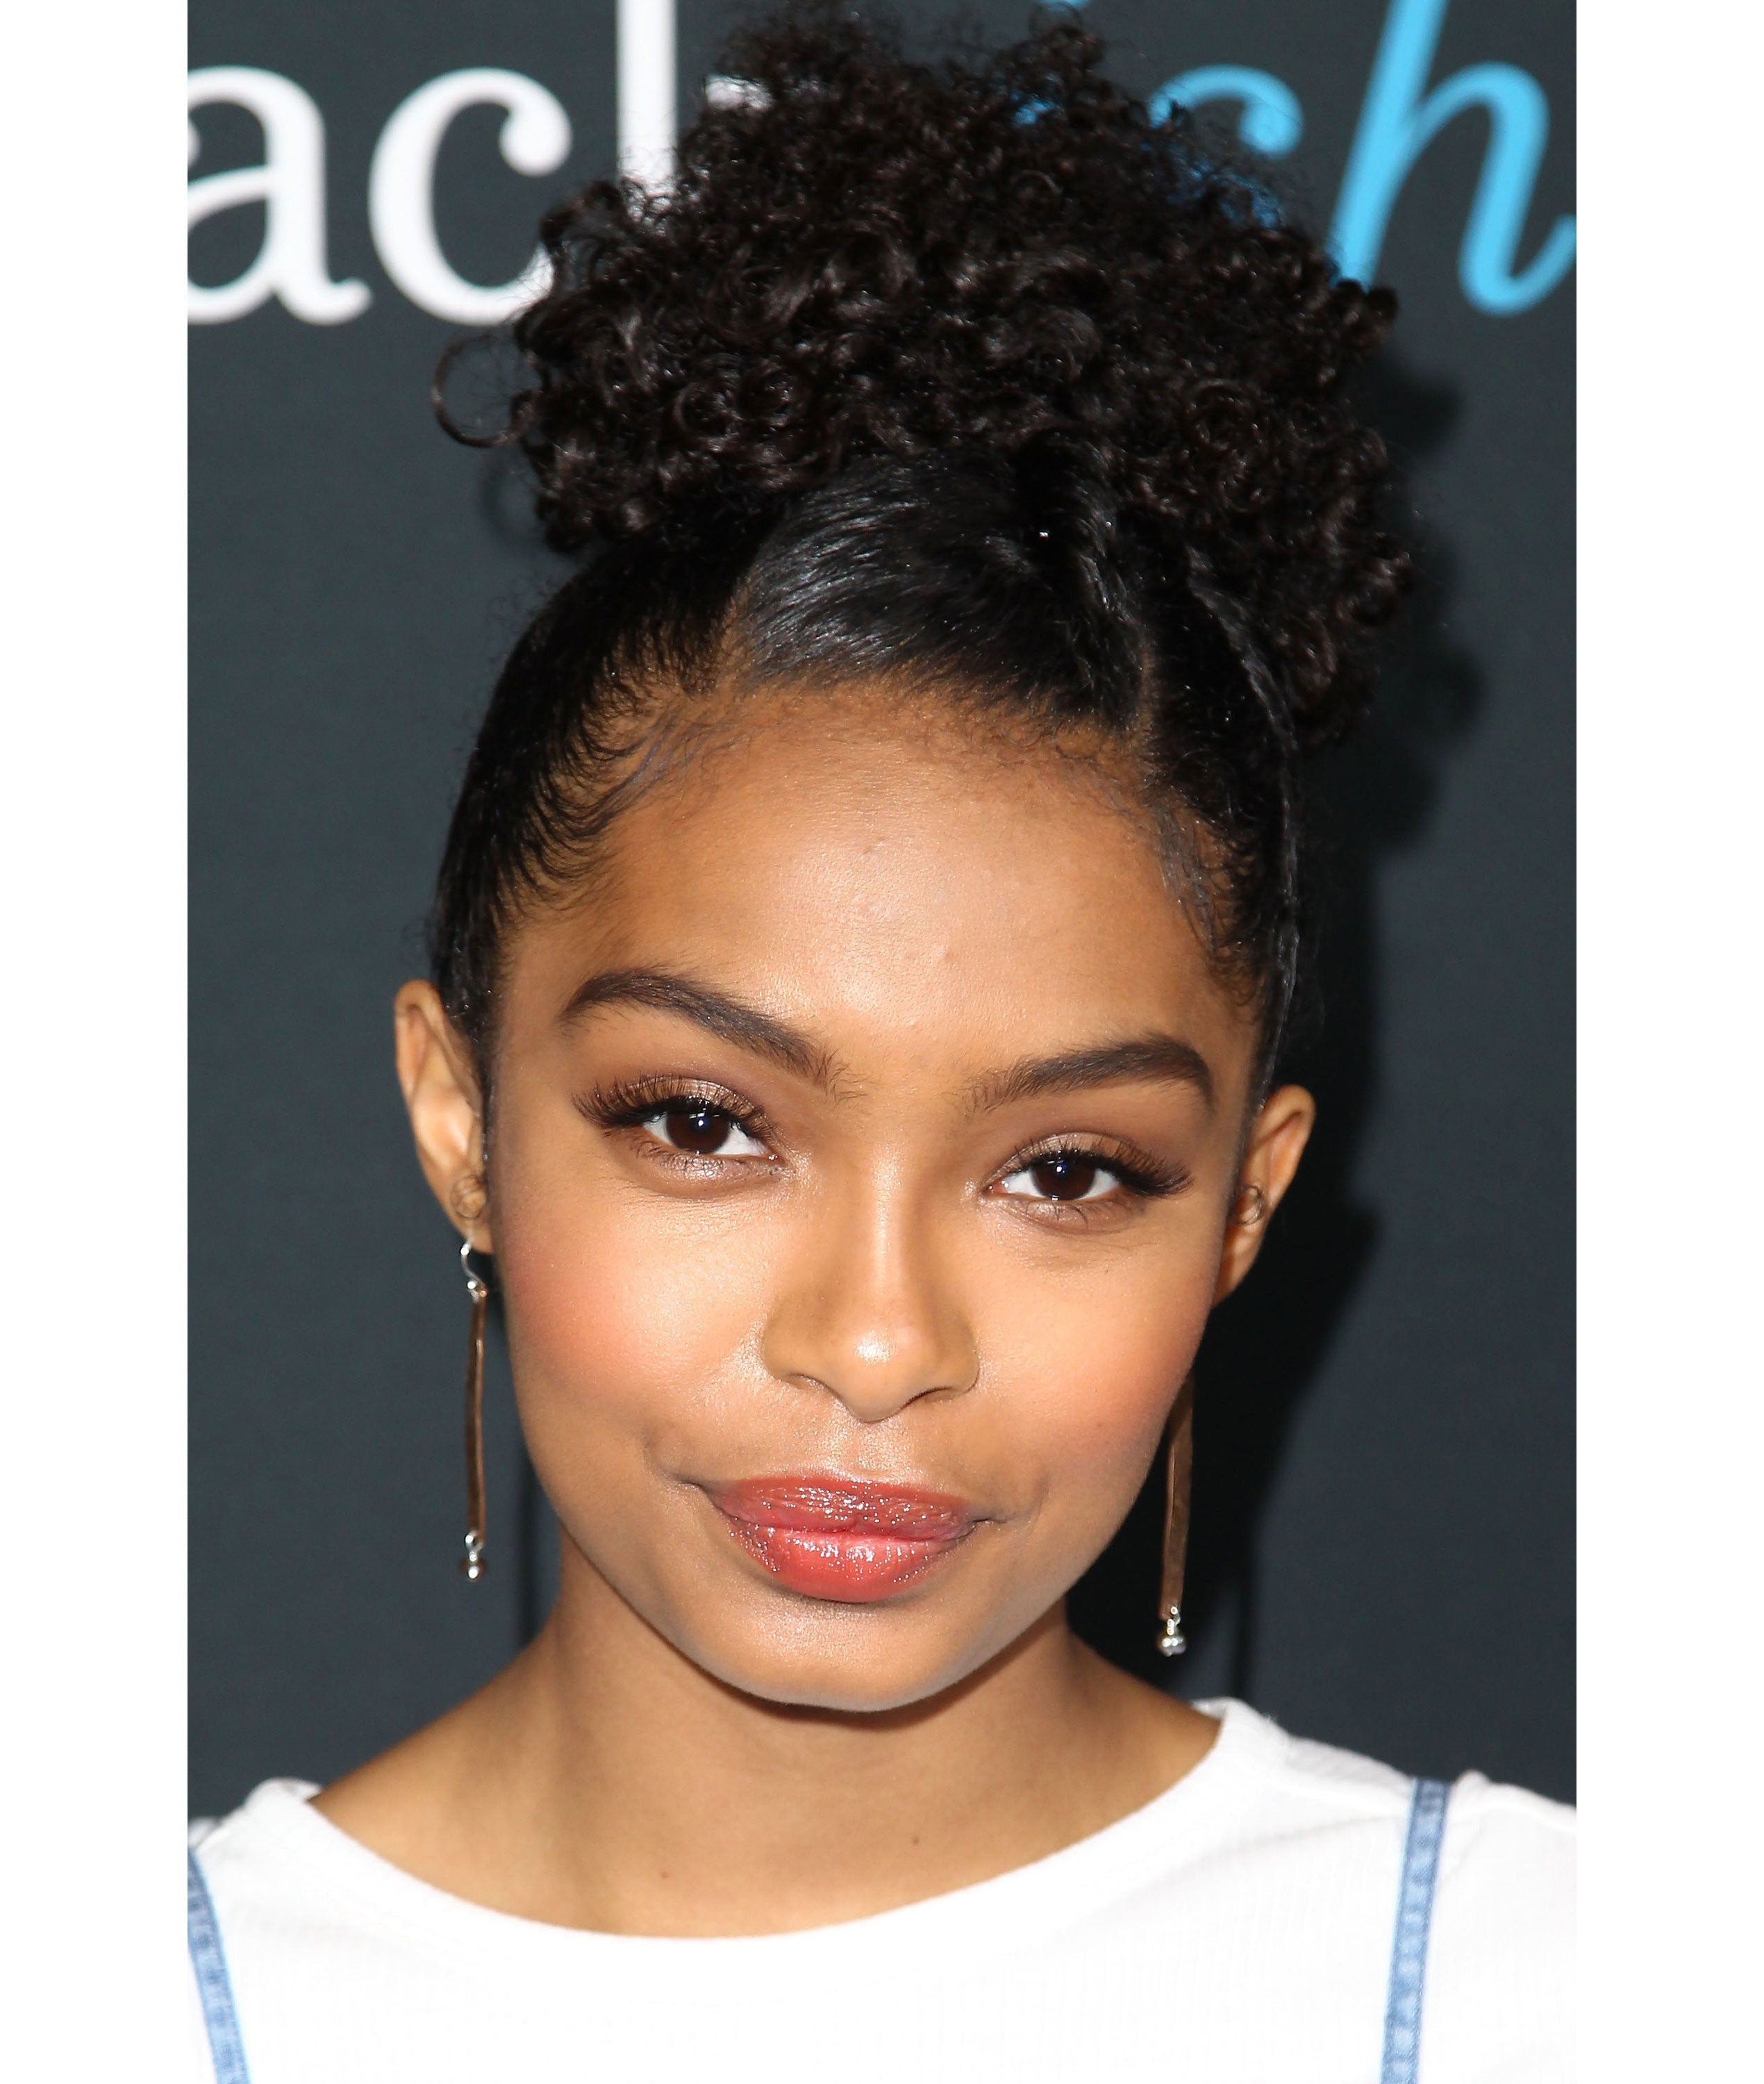 Yara Shahidi Looking For A “nonexistent Curly Hair Emoji To Rep Her